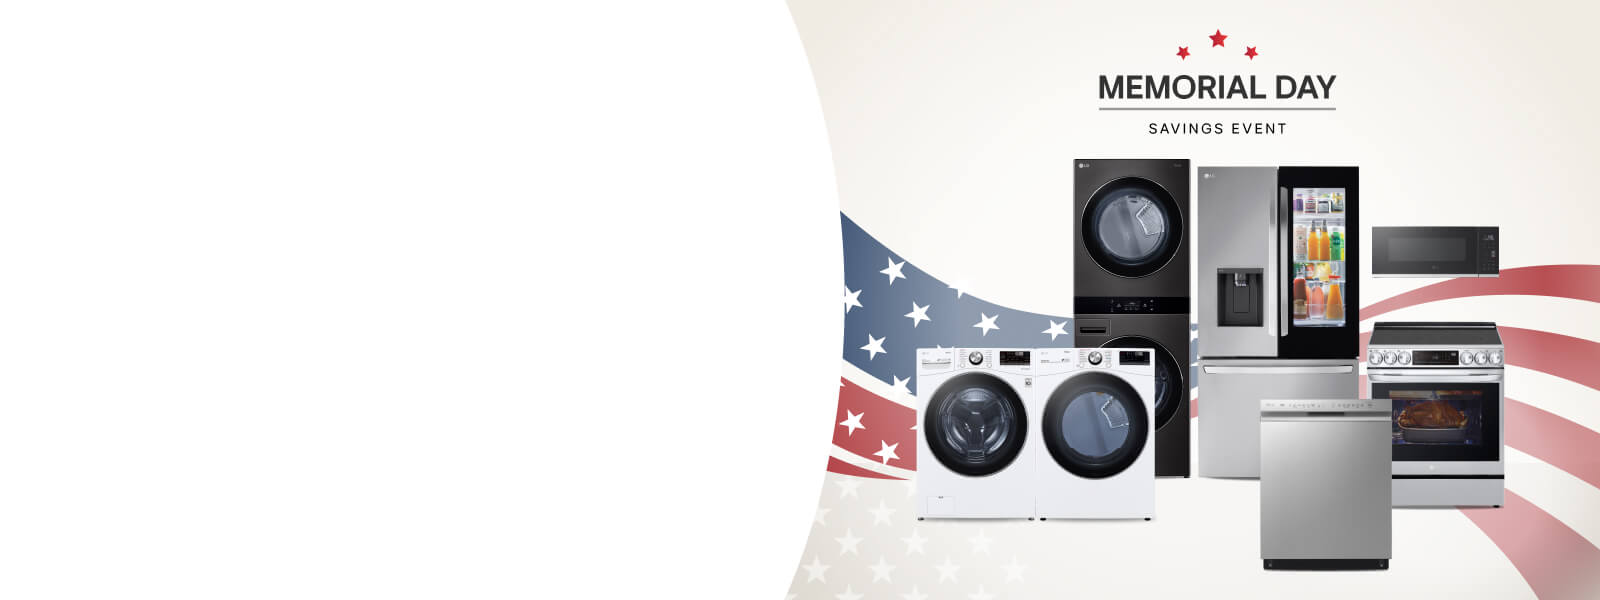 Celebrate Memorial Day with 30%-55% off select appliances image for desktop